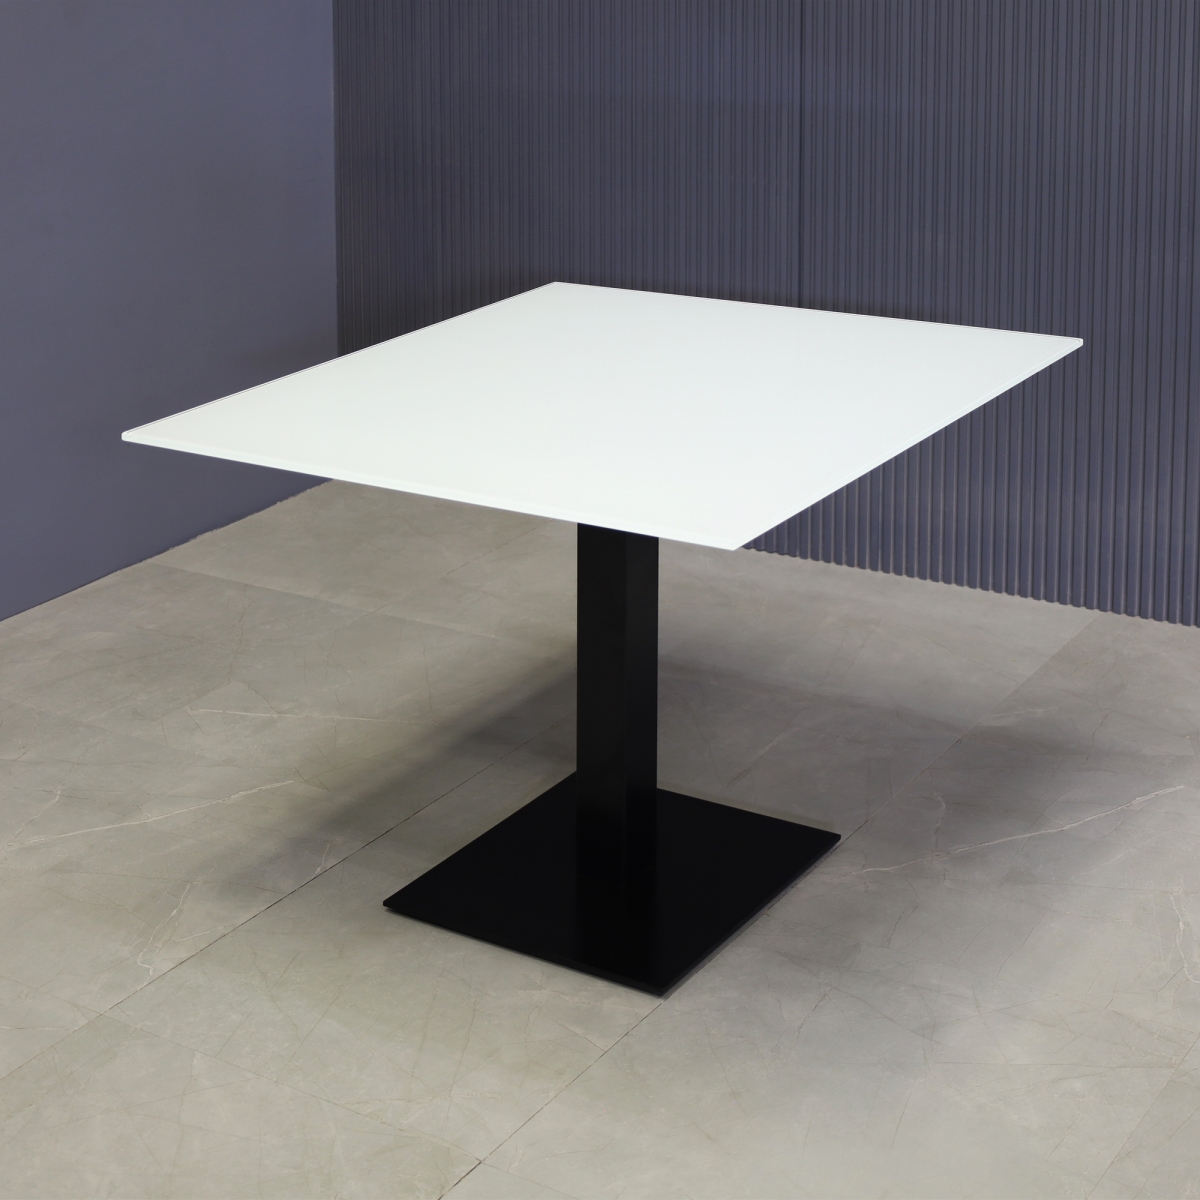 California Square Cafeteria Table with White Tempered Glass Top - 36 In. - Stock #64